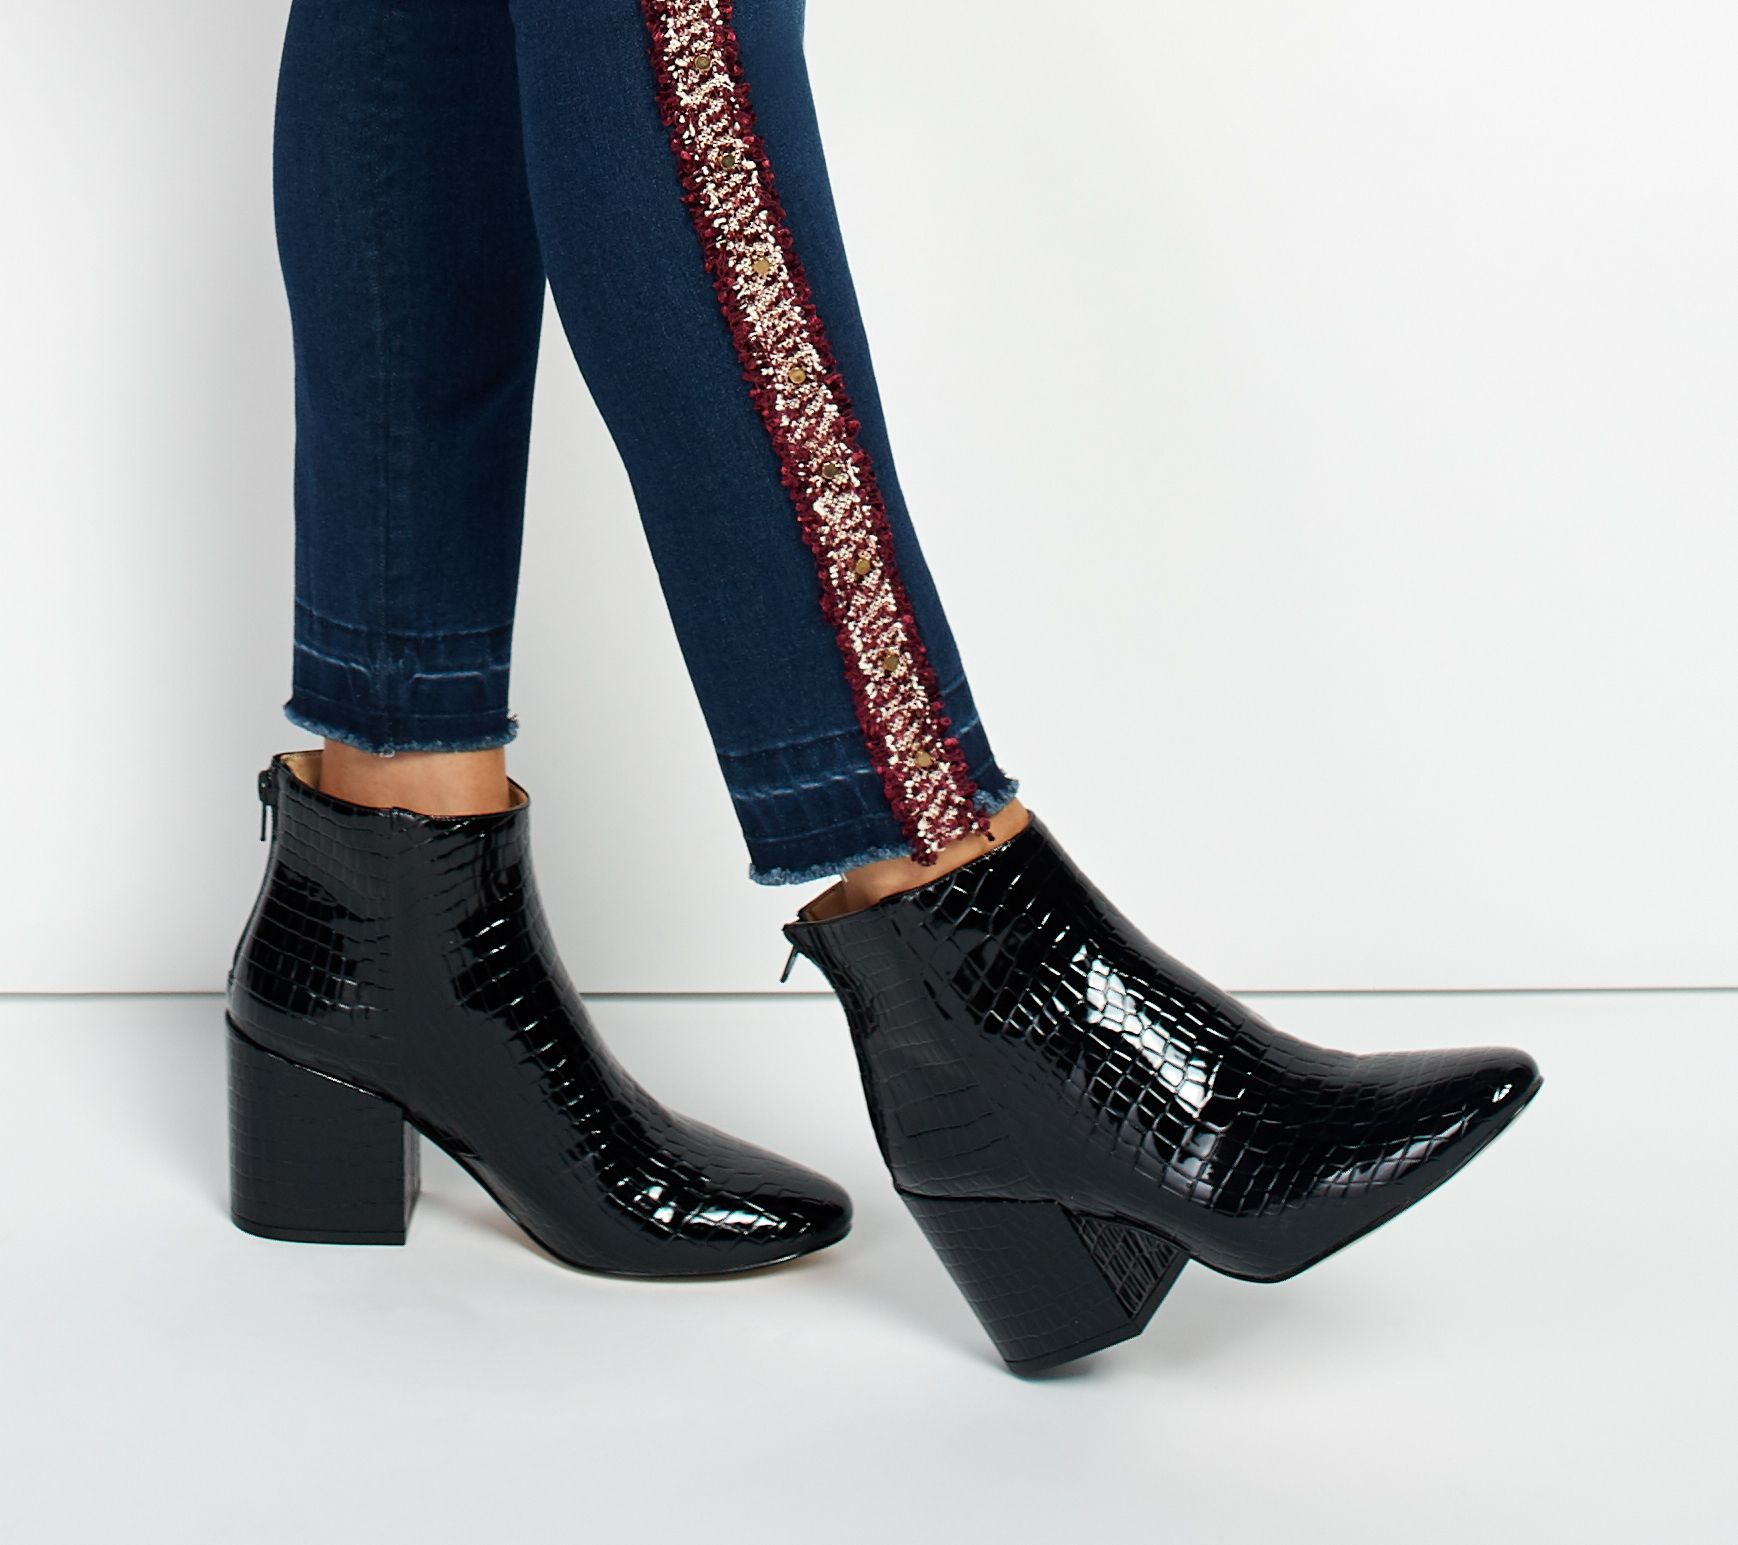 Katy Perry Croco Embossed Ankle Boots - The Hudson - QVC.com